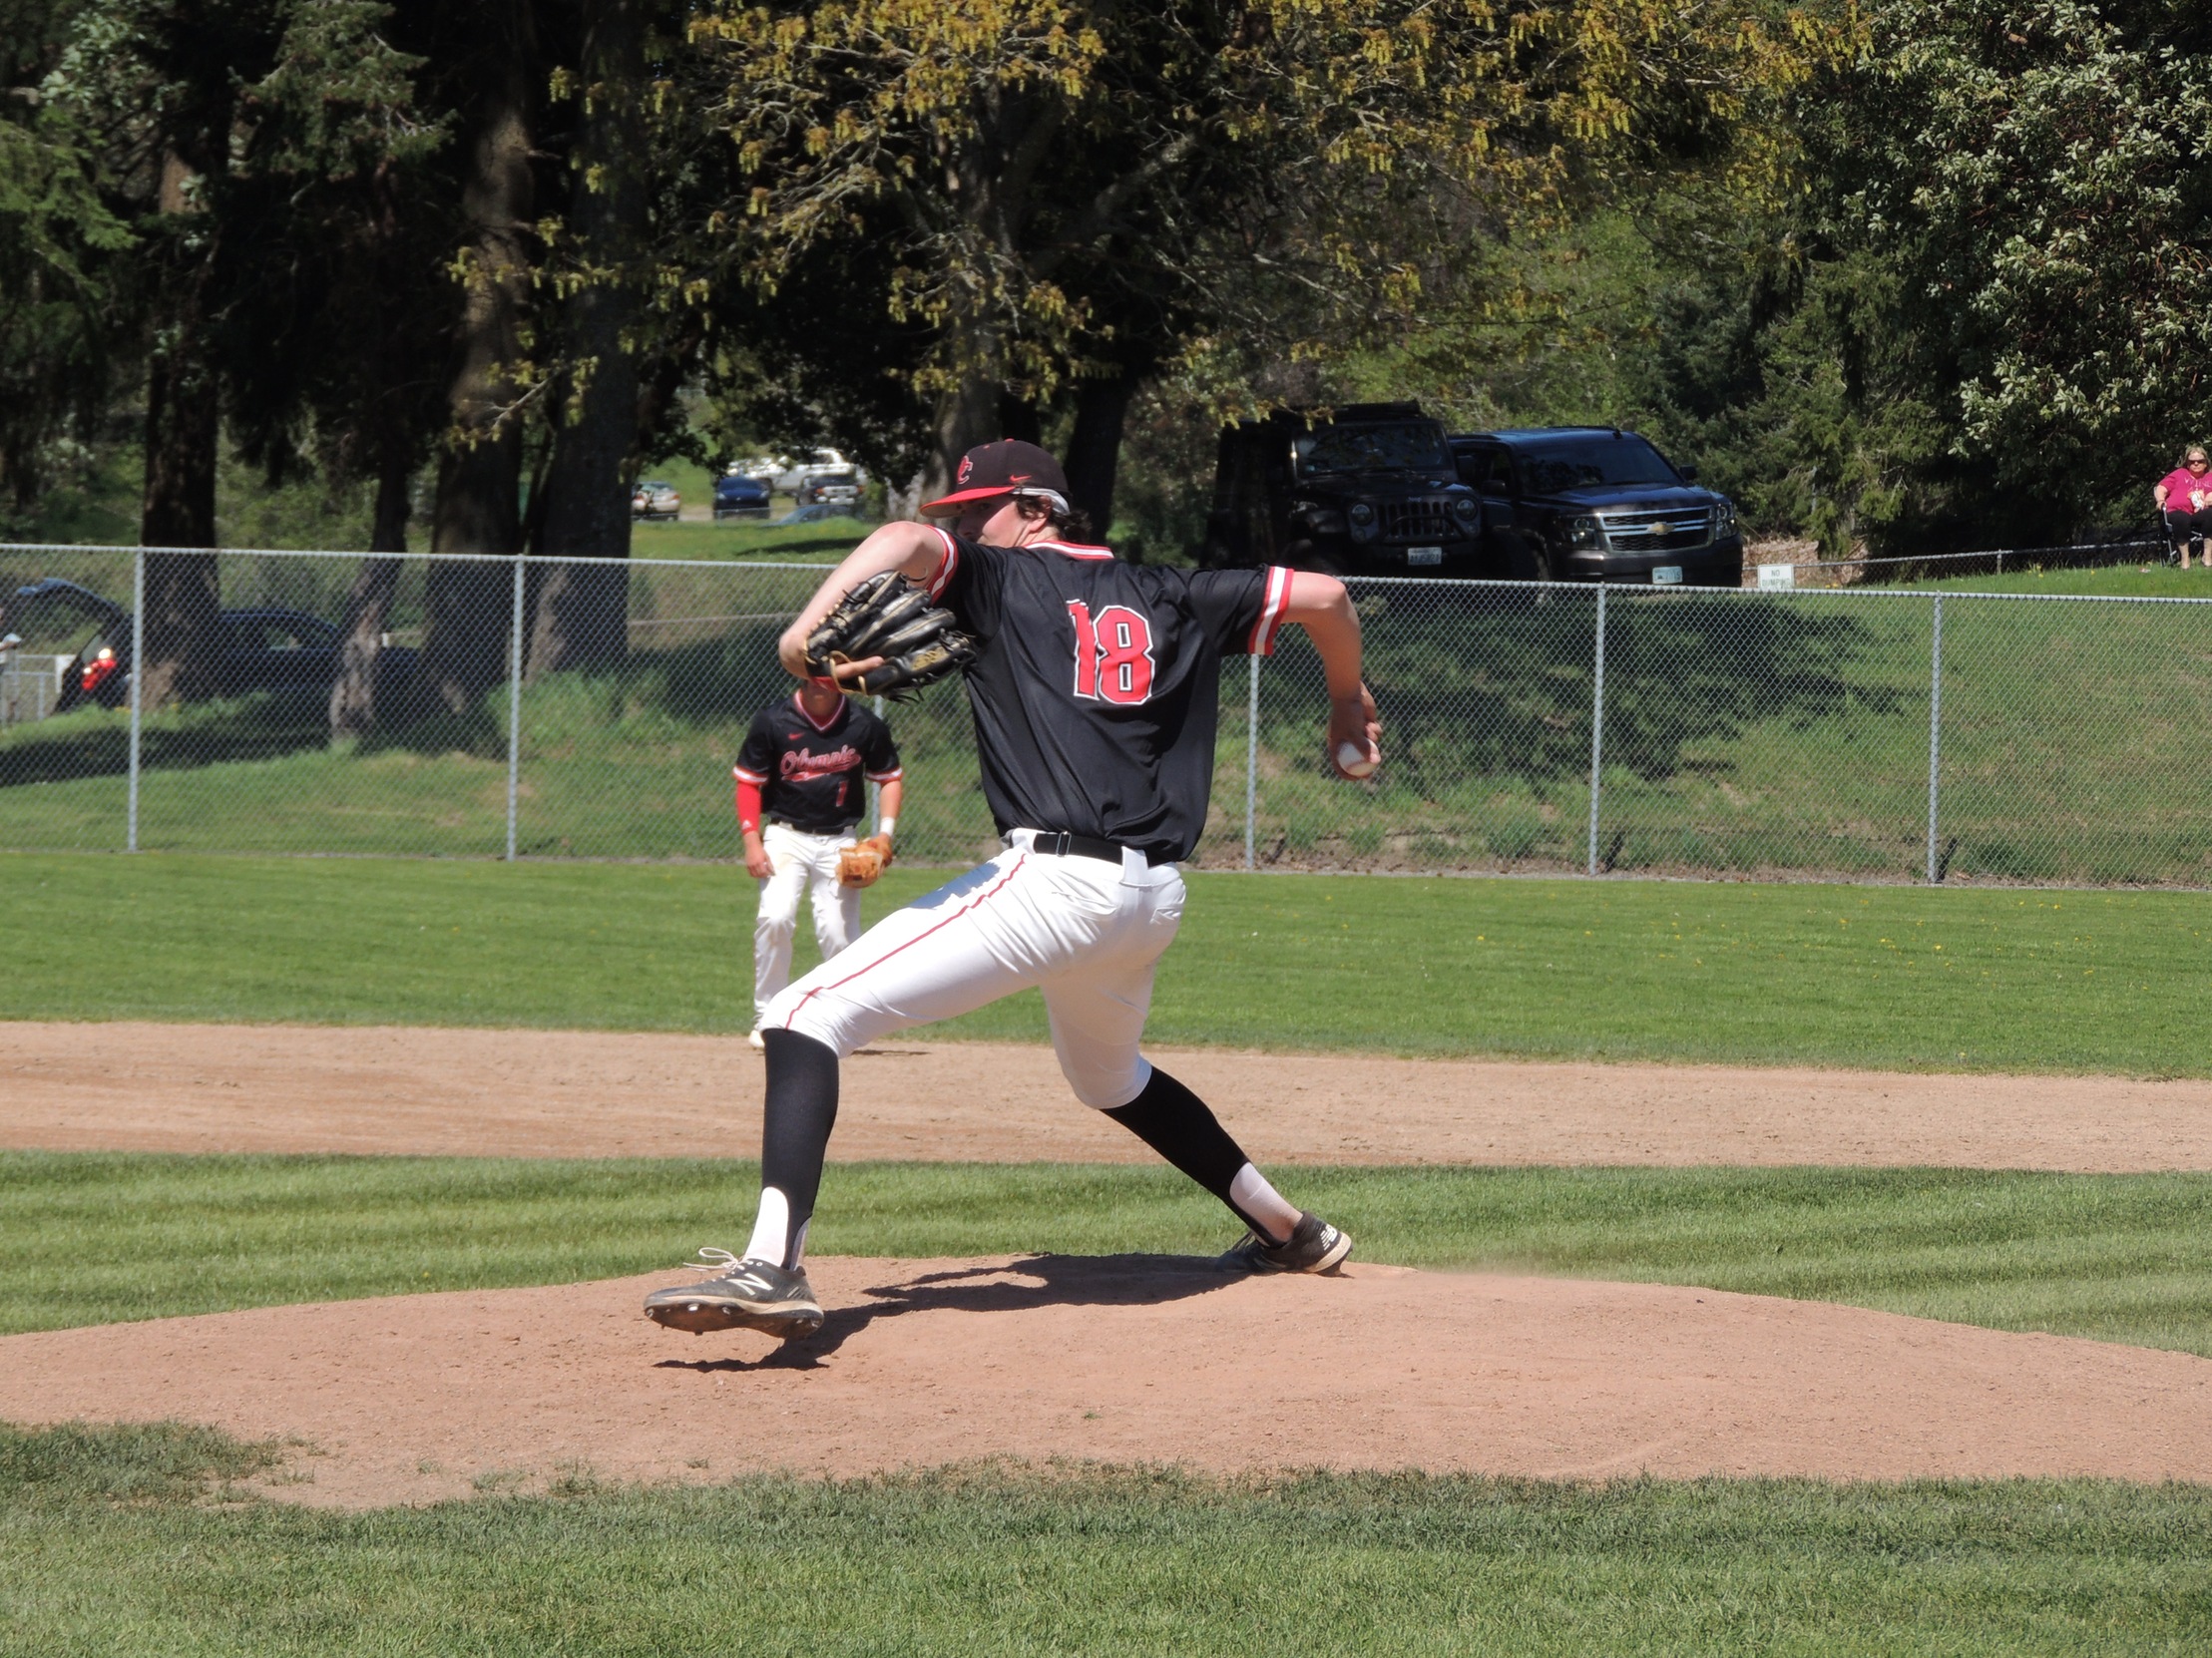 Brayden Hagerty pitches during a baseball game.